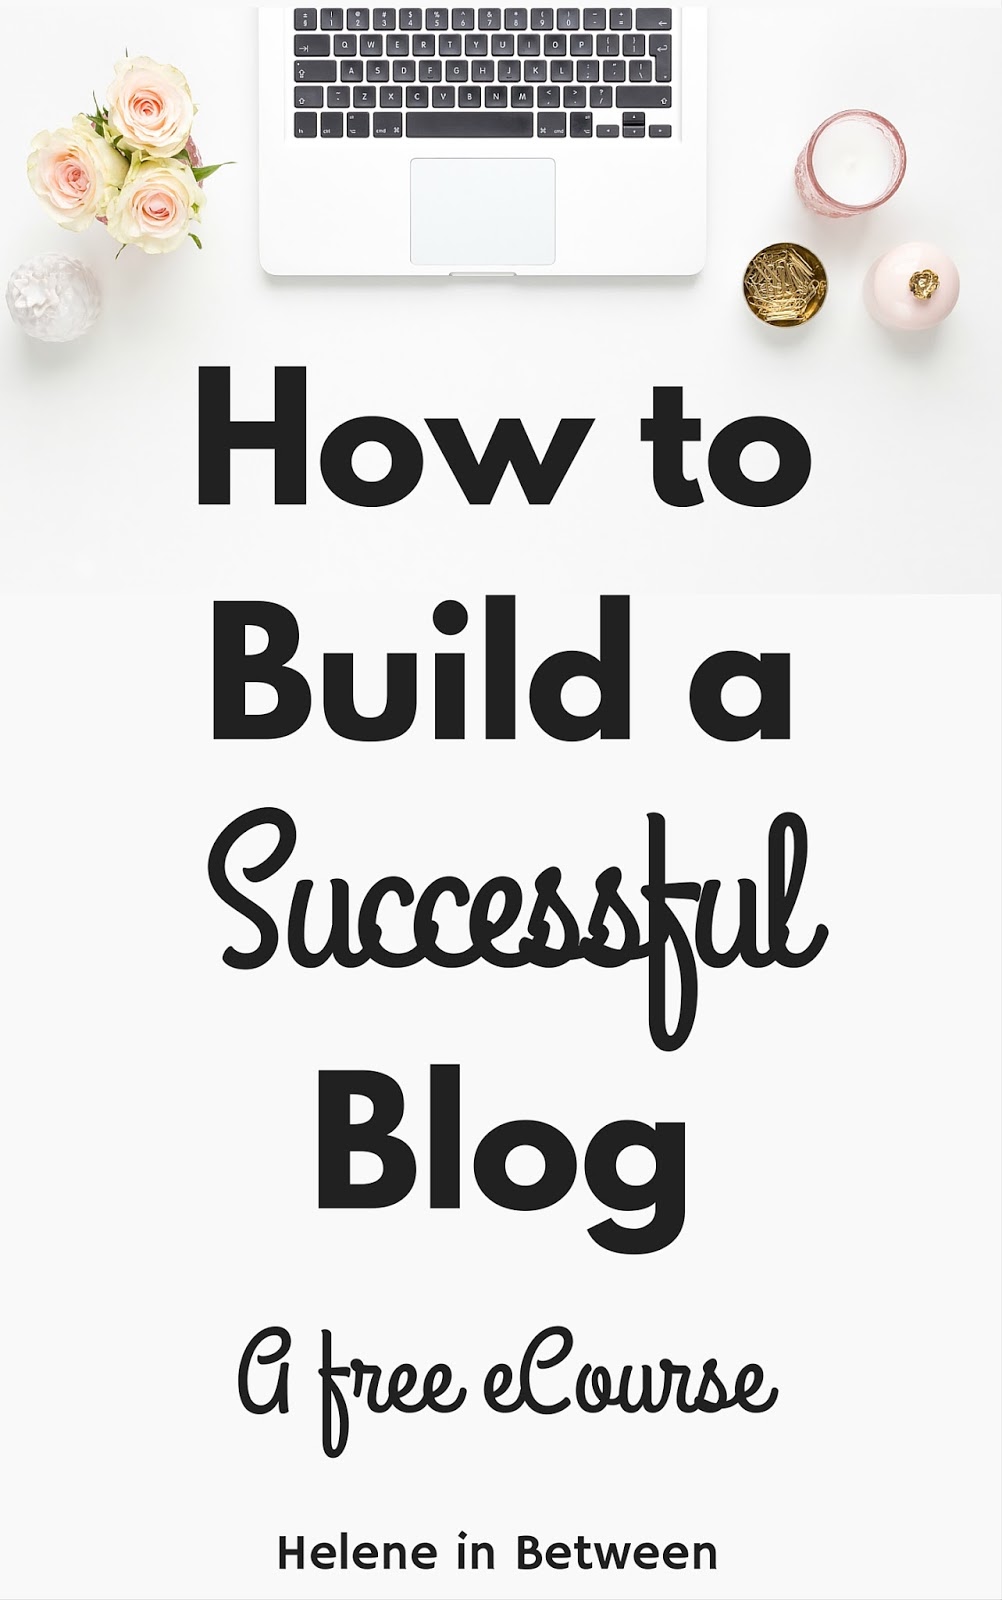 How to build a successful blog